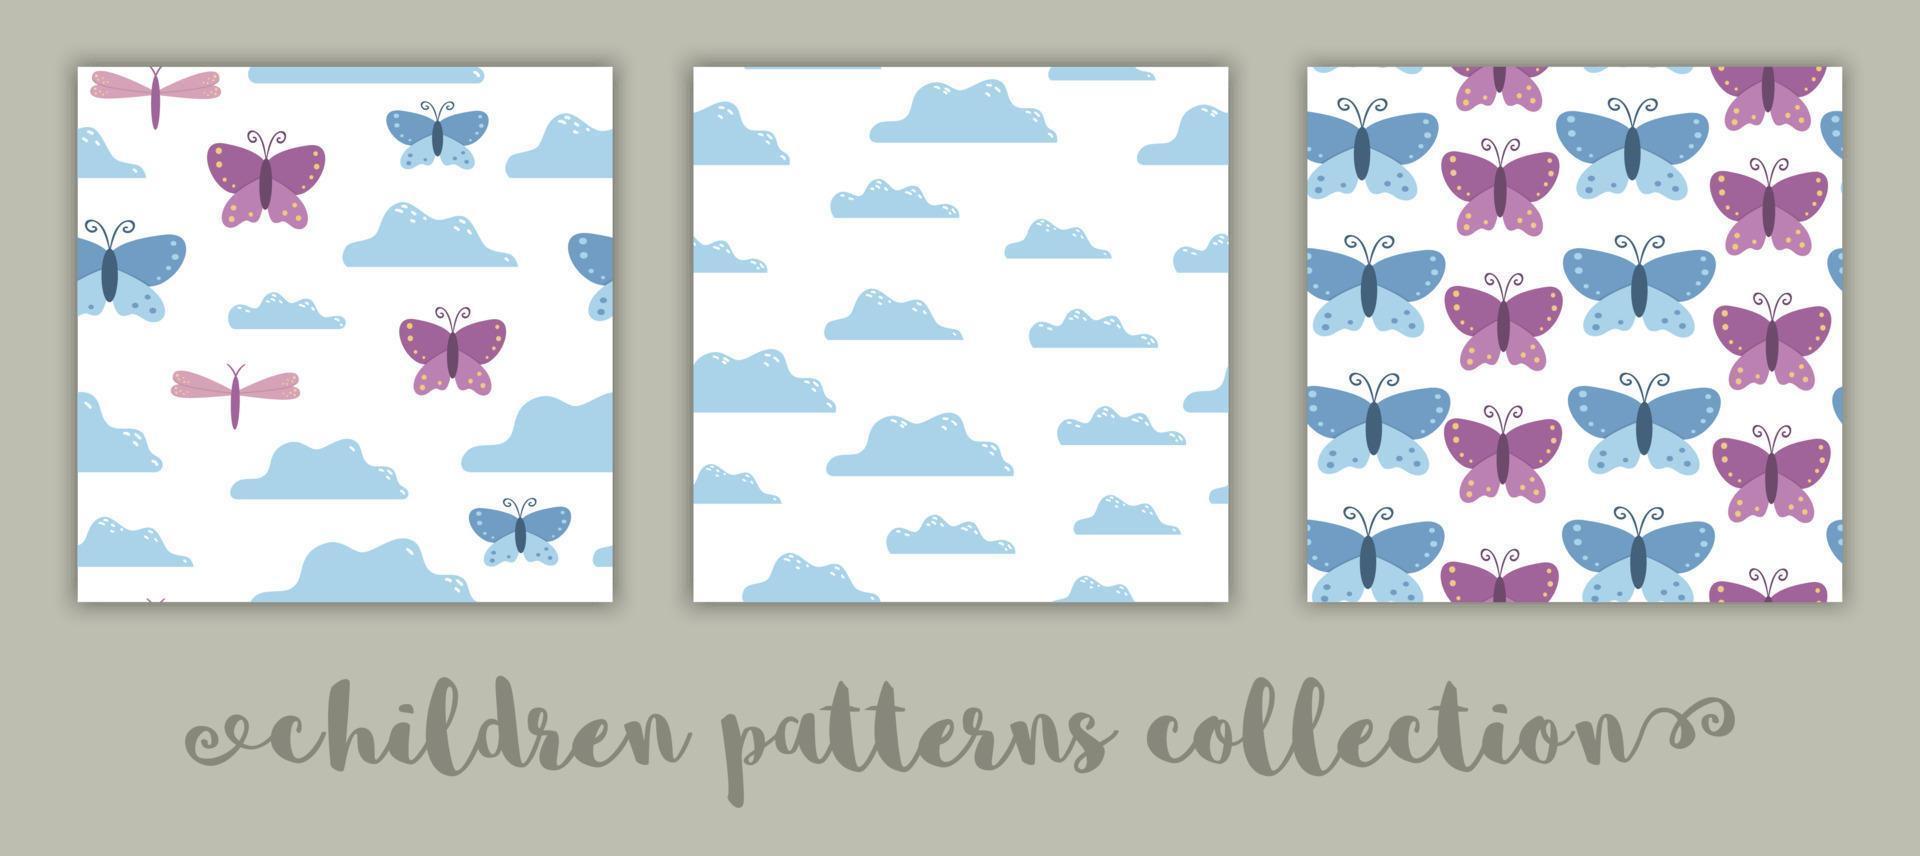 Set of vector seamless patterns for children. Flat cartoon background with butterflies, clouds, dragonflies. Cute blue and pink illustration.